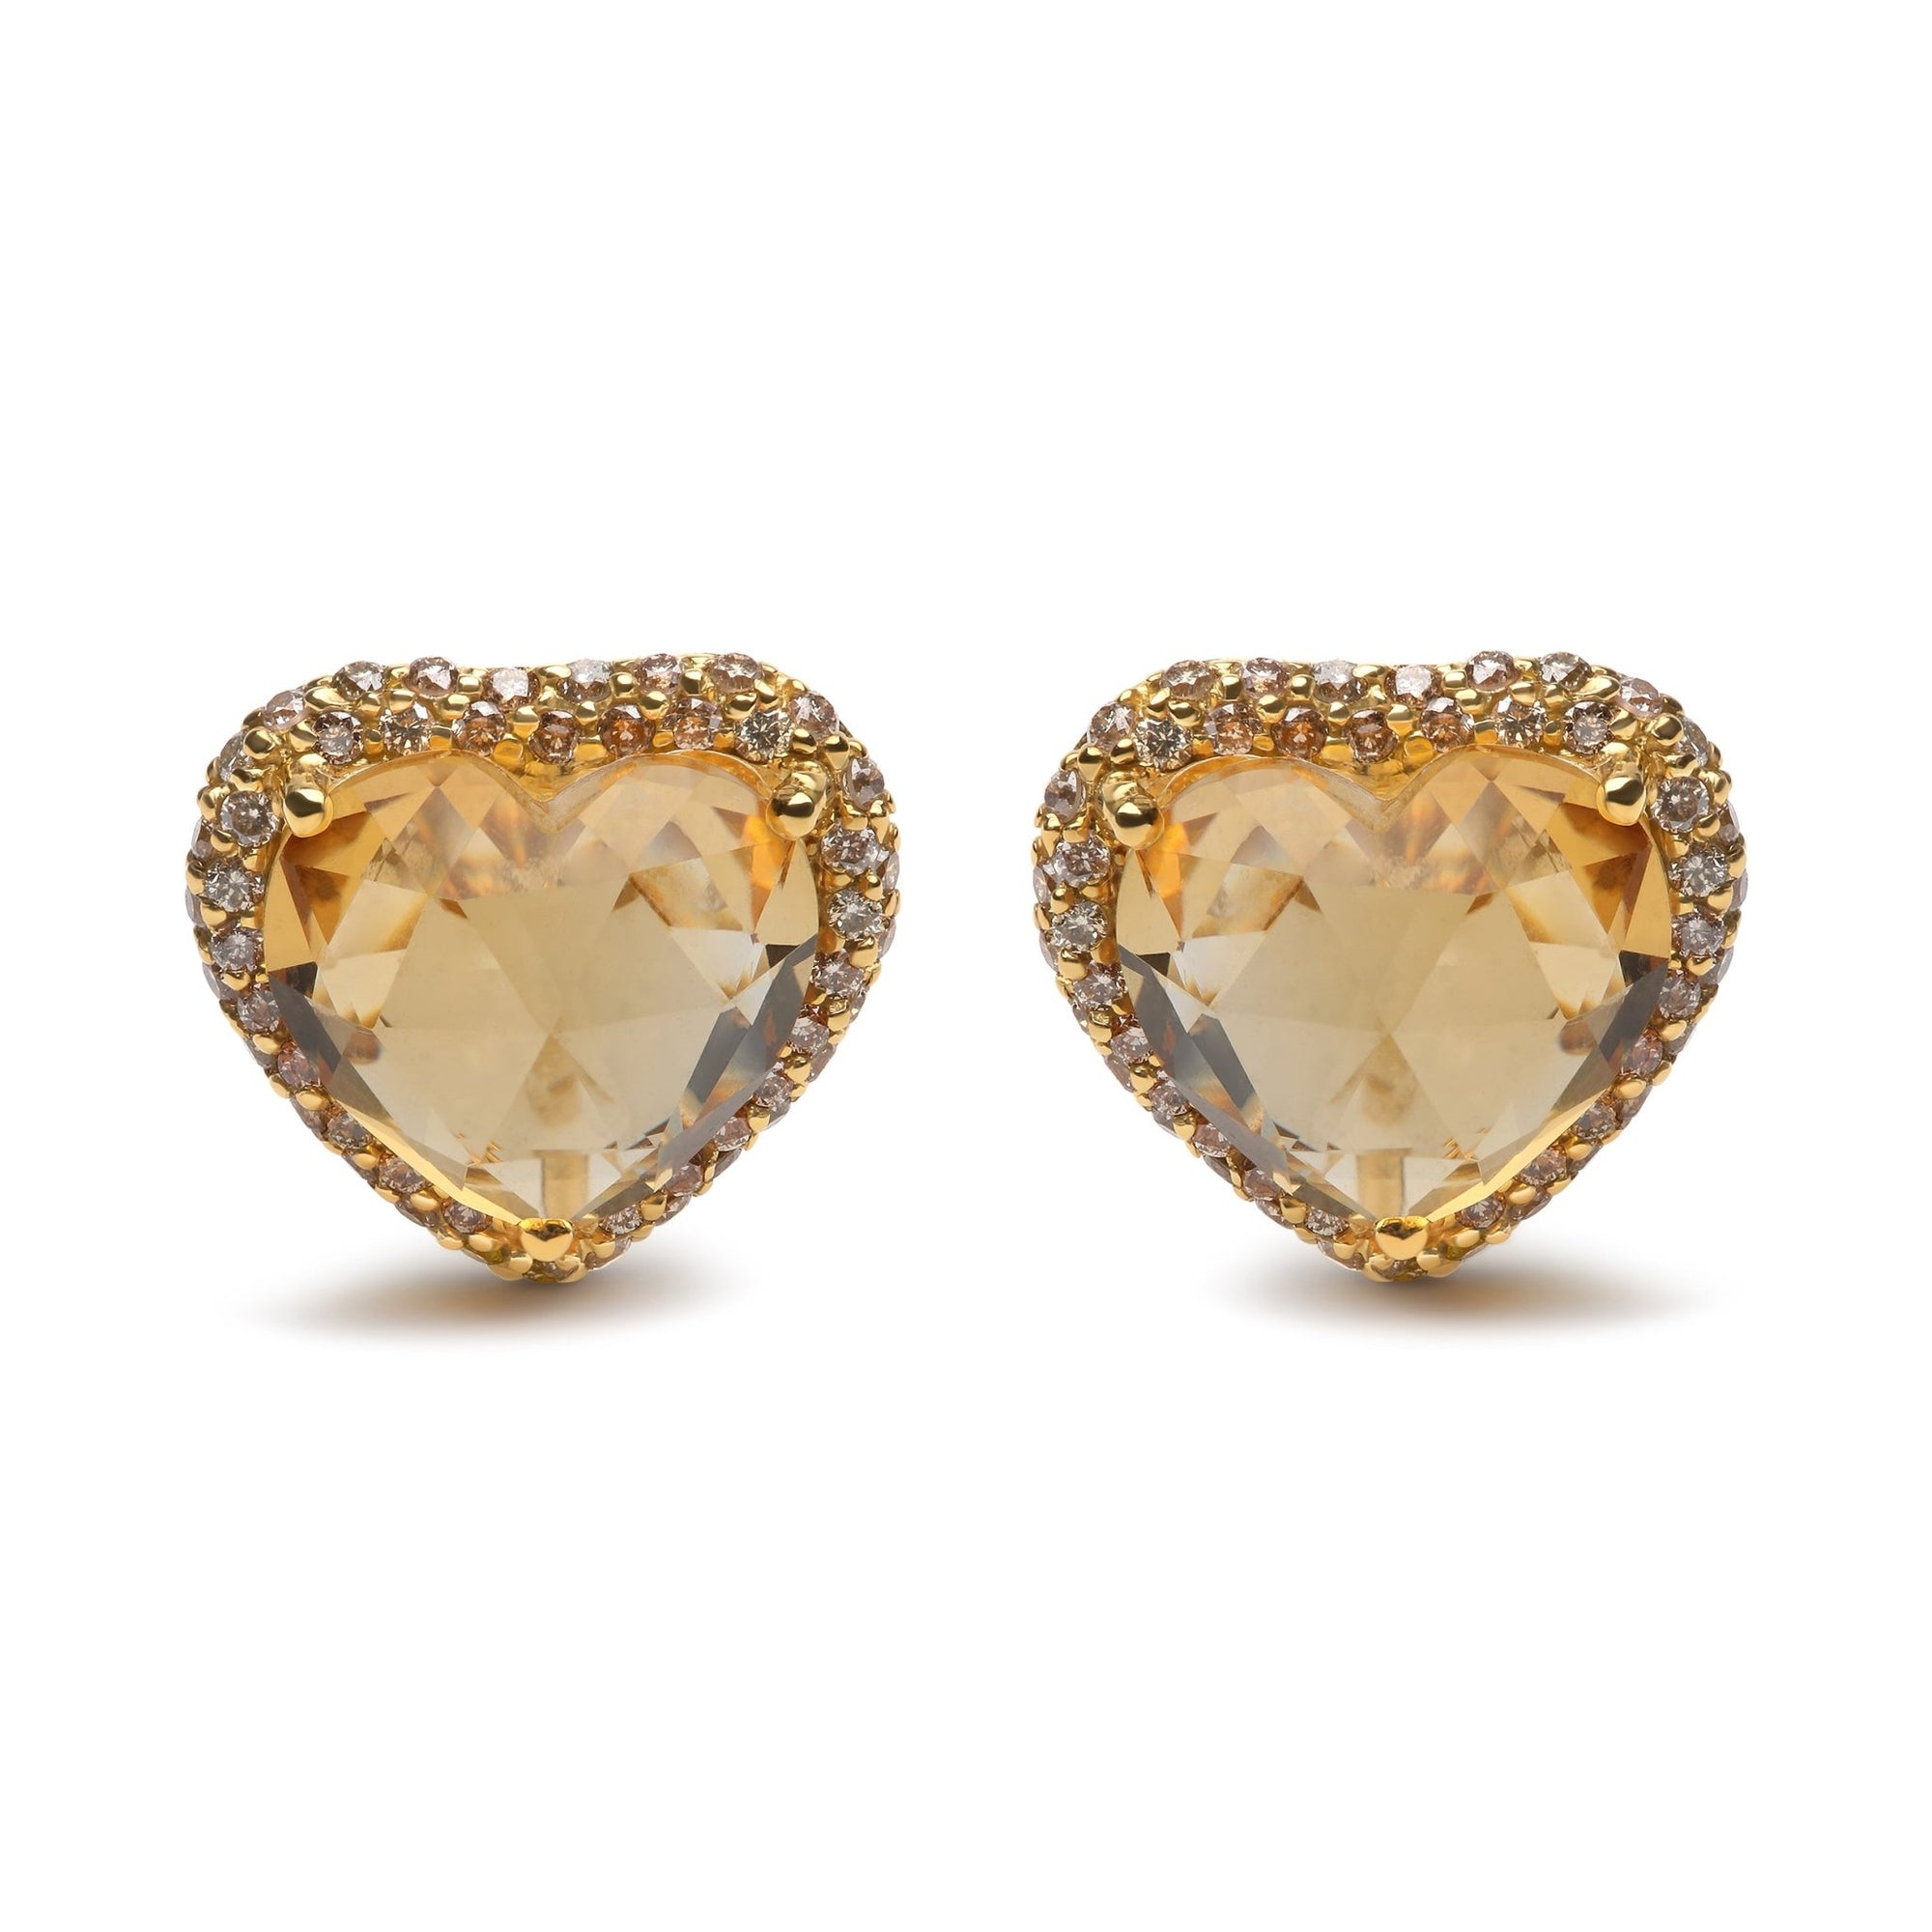 18K Yellow Gold 2/3 Cttw Brown Diamonds and 11x11mm Heart-Cut Yellow Citrine Gemstone Halo Heart Stud Earrings (Brown Color, SI1-SI2 Clarity) - LinkagejewelrydesignLinkagejewelrydesign